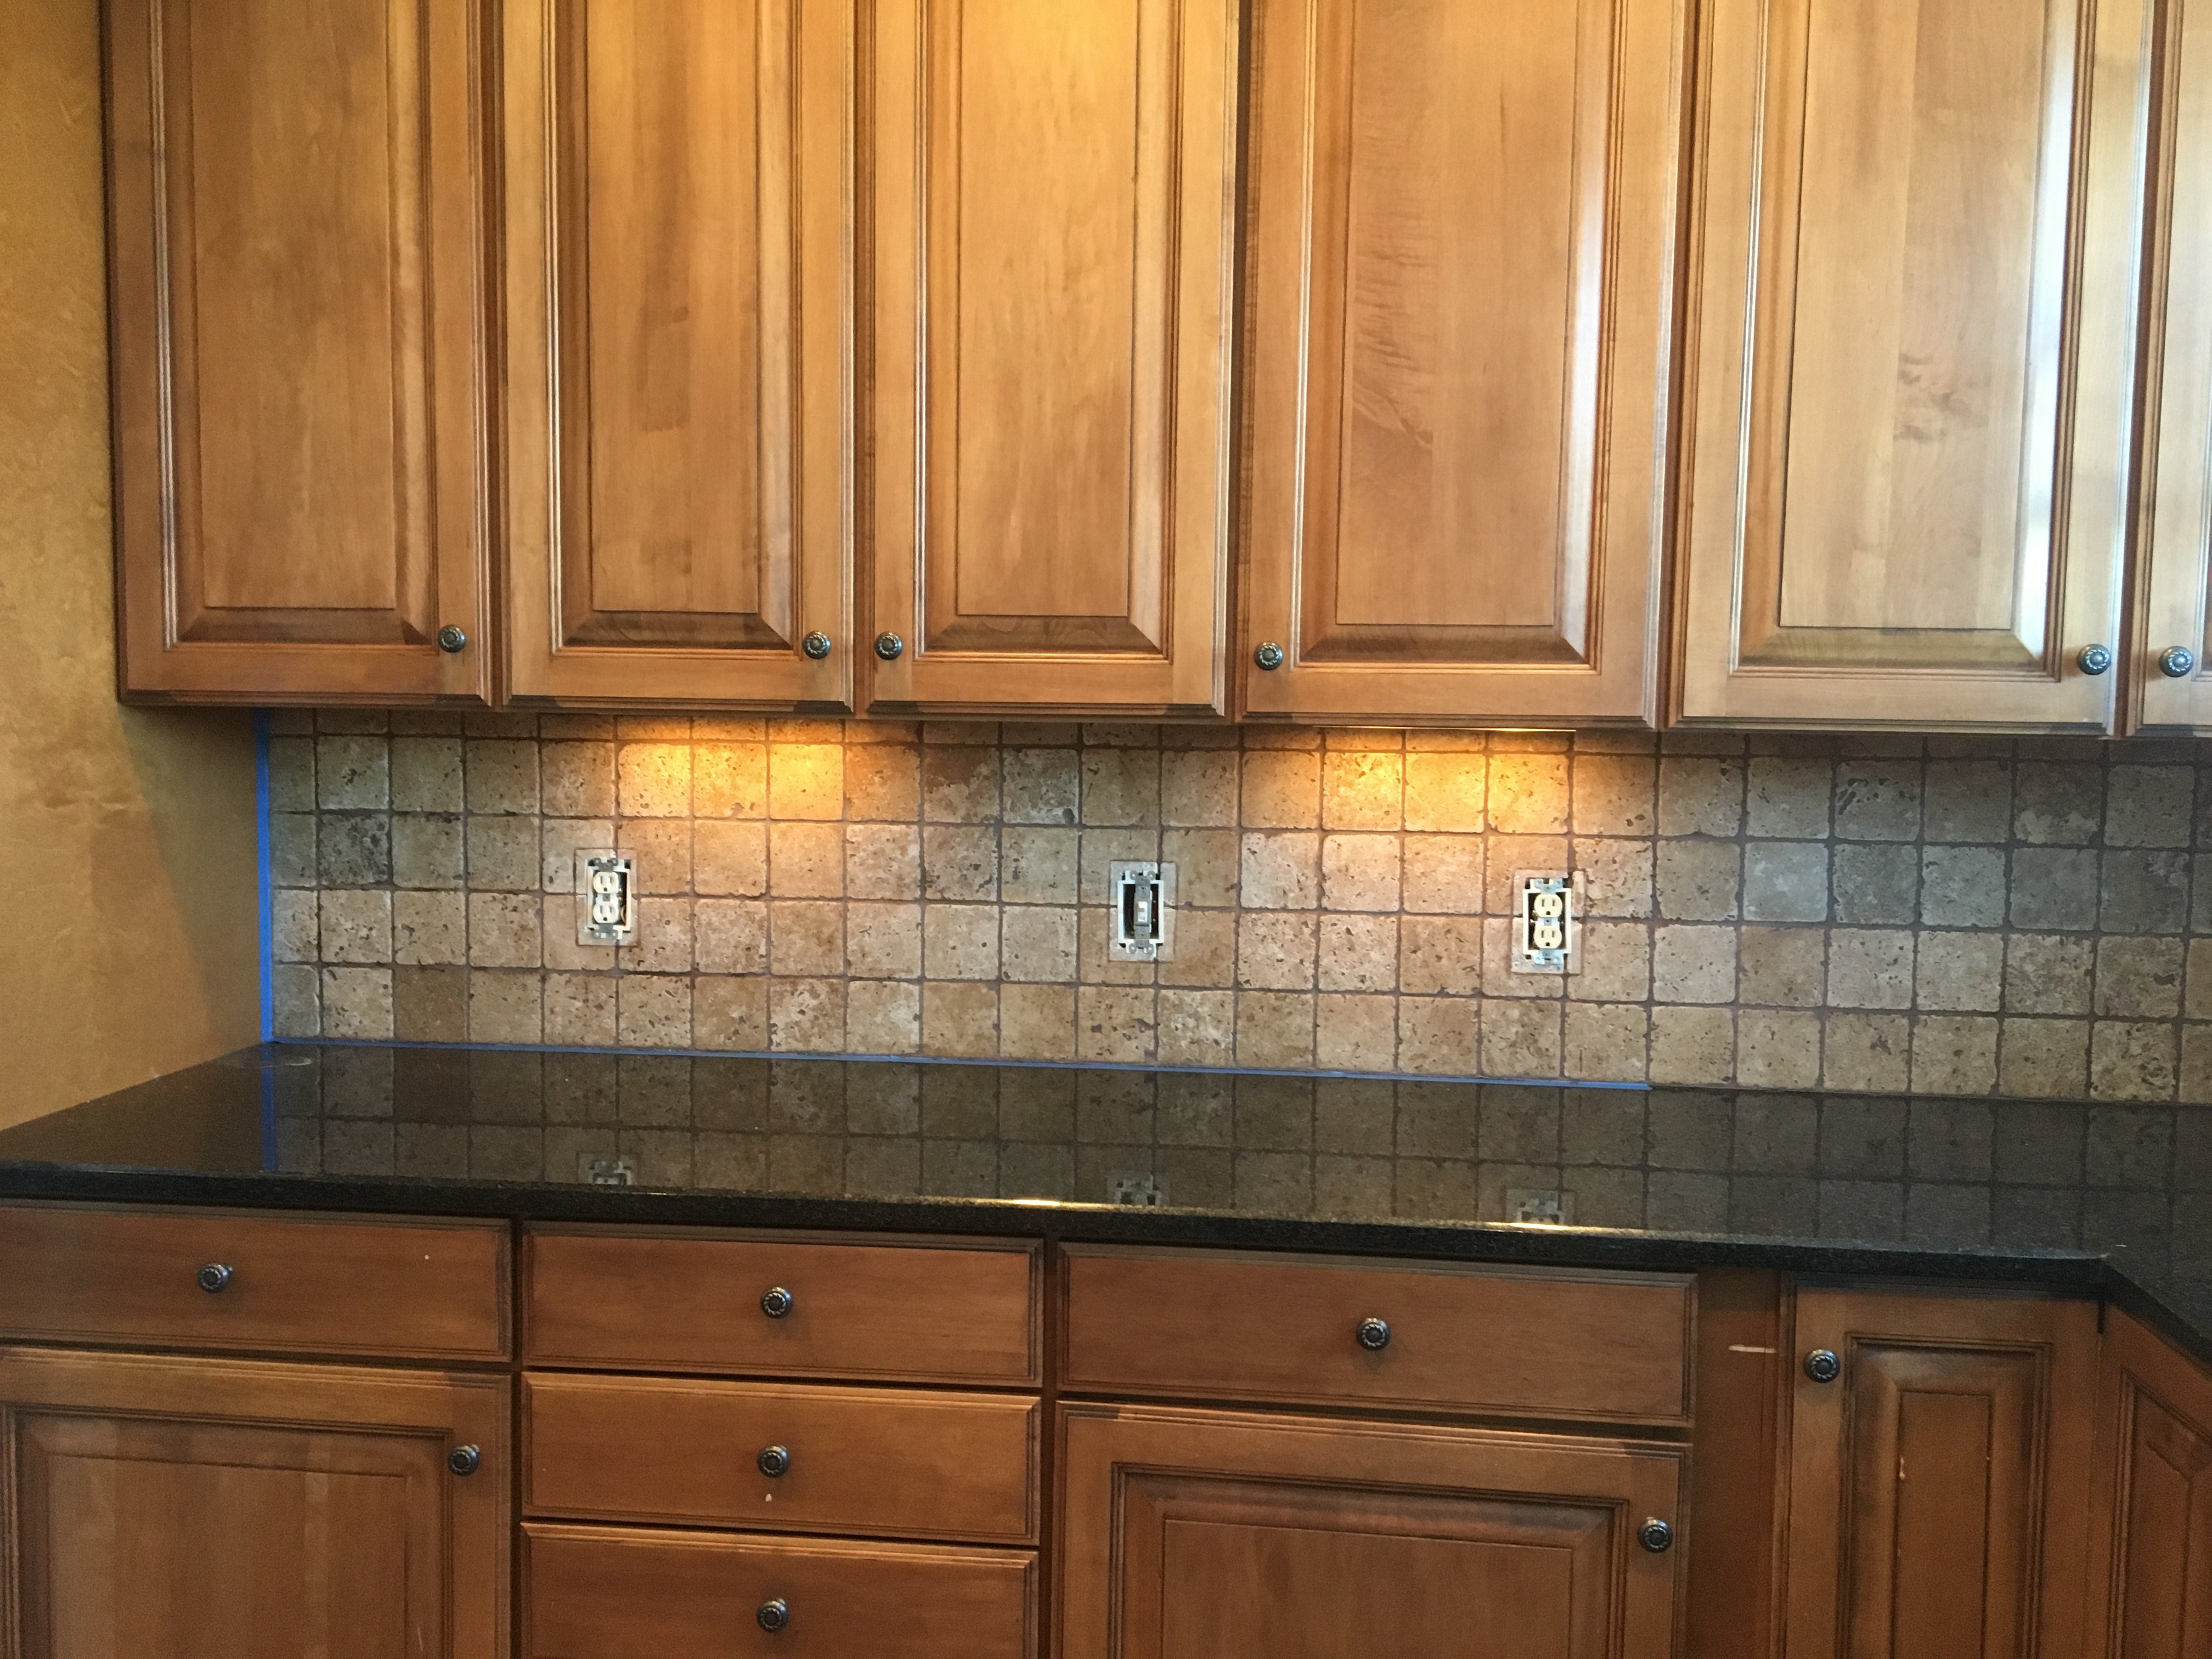 backsplash in your kitchen can be painted in one day